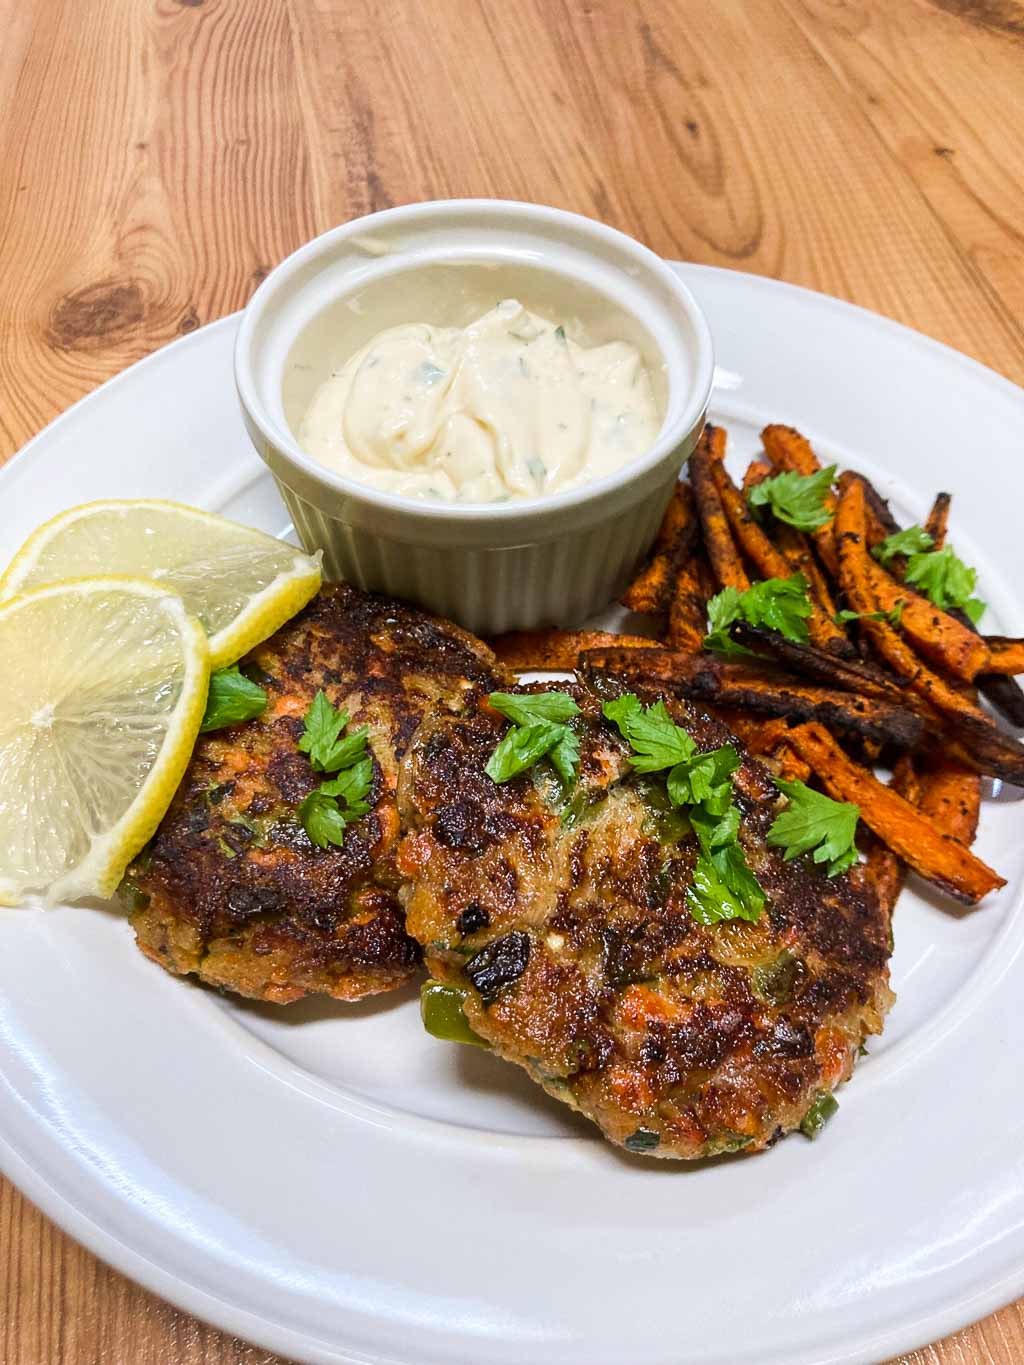 Salmon cakes with a garlic aioli and carrot fries